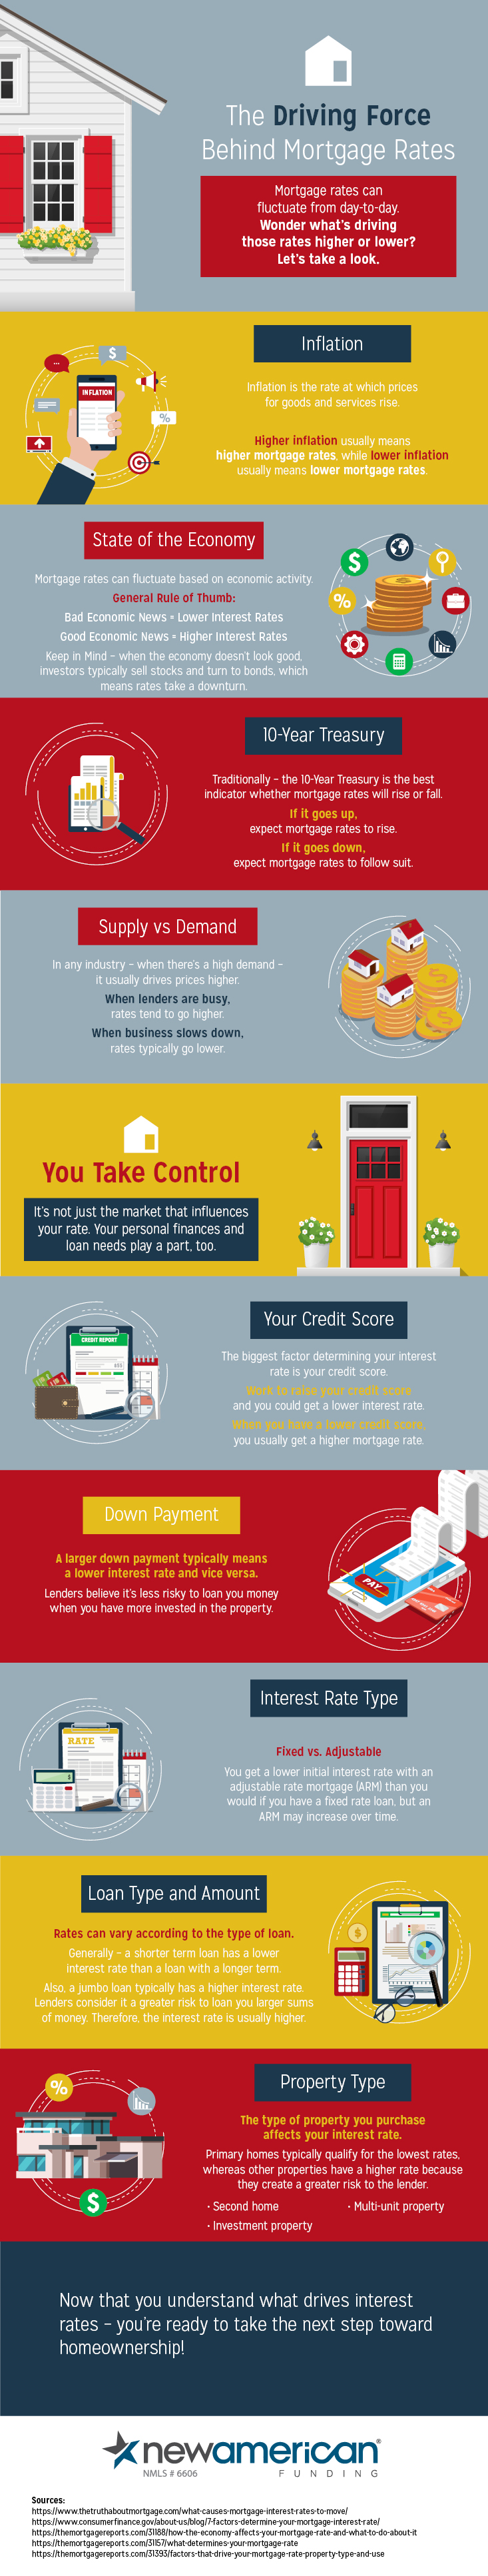 Mortgage Rates Infographic